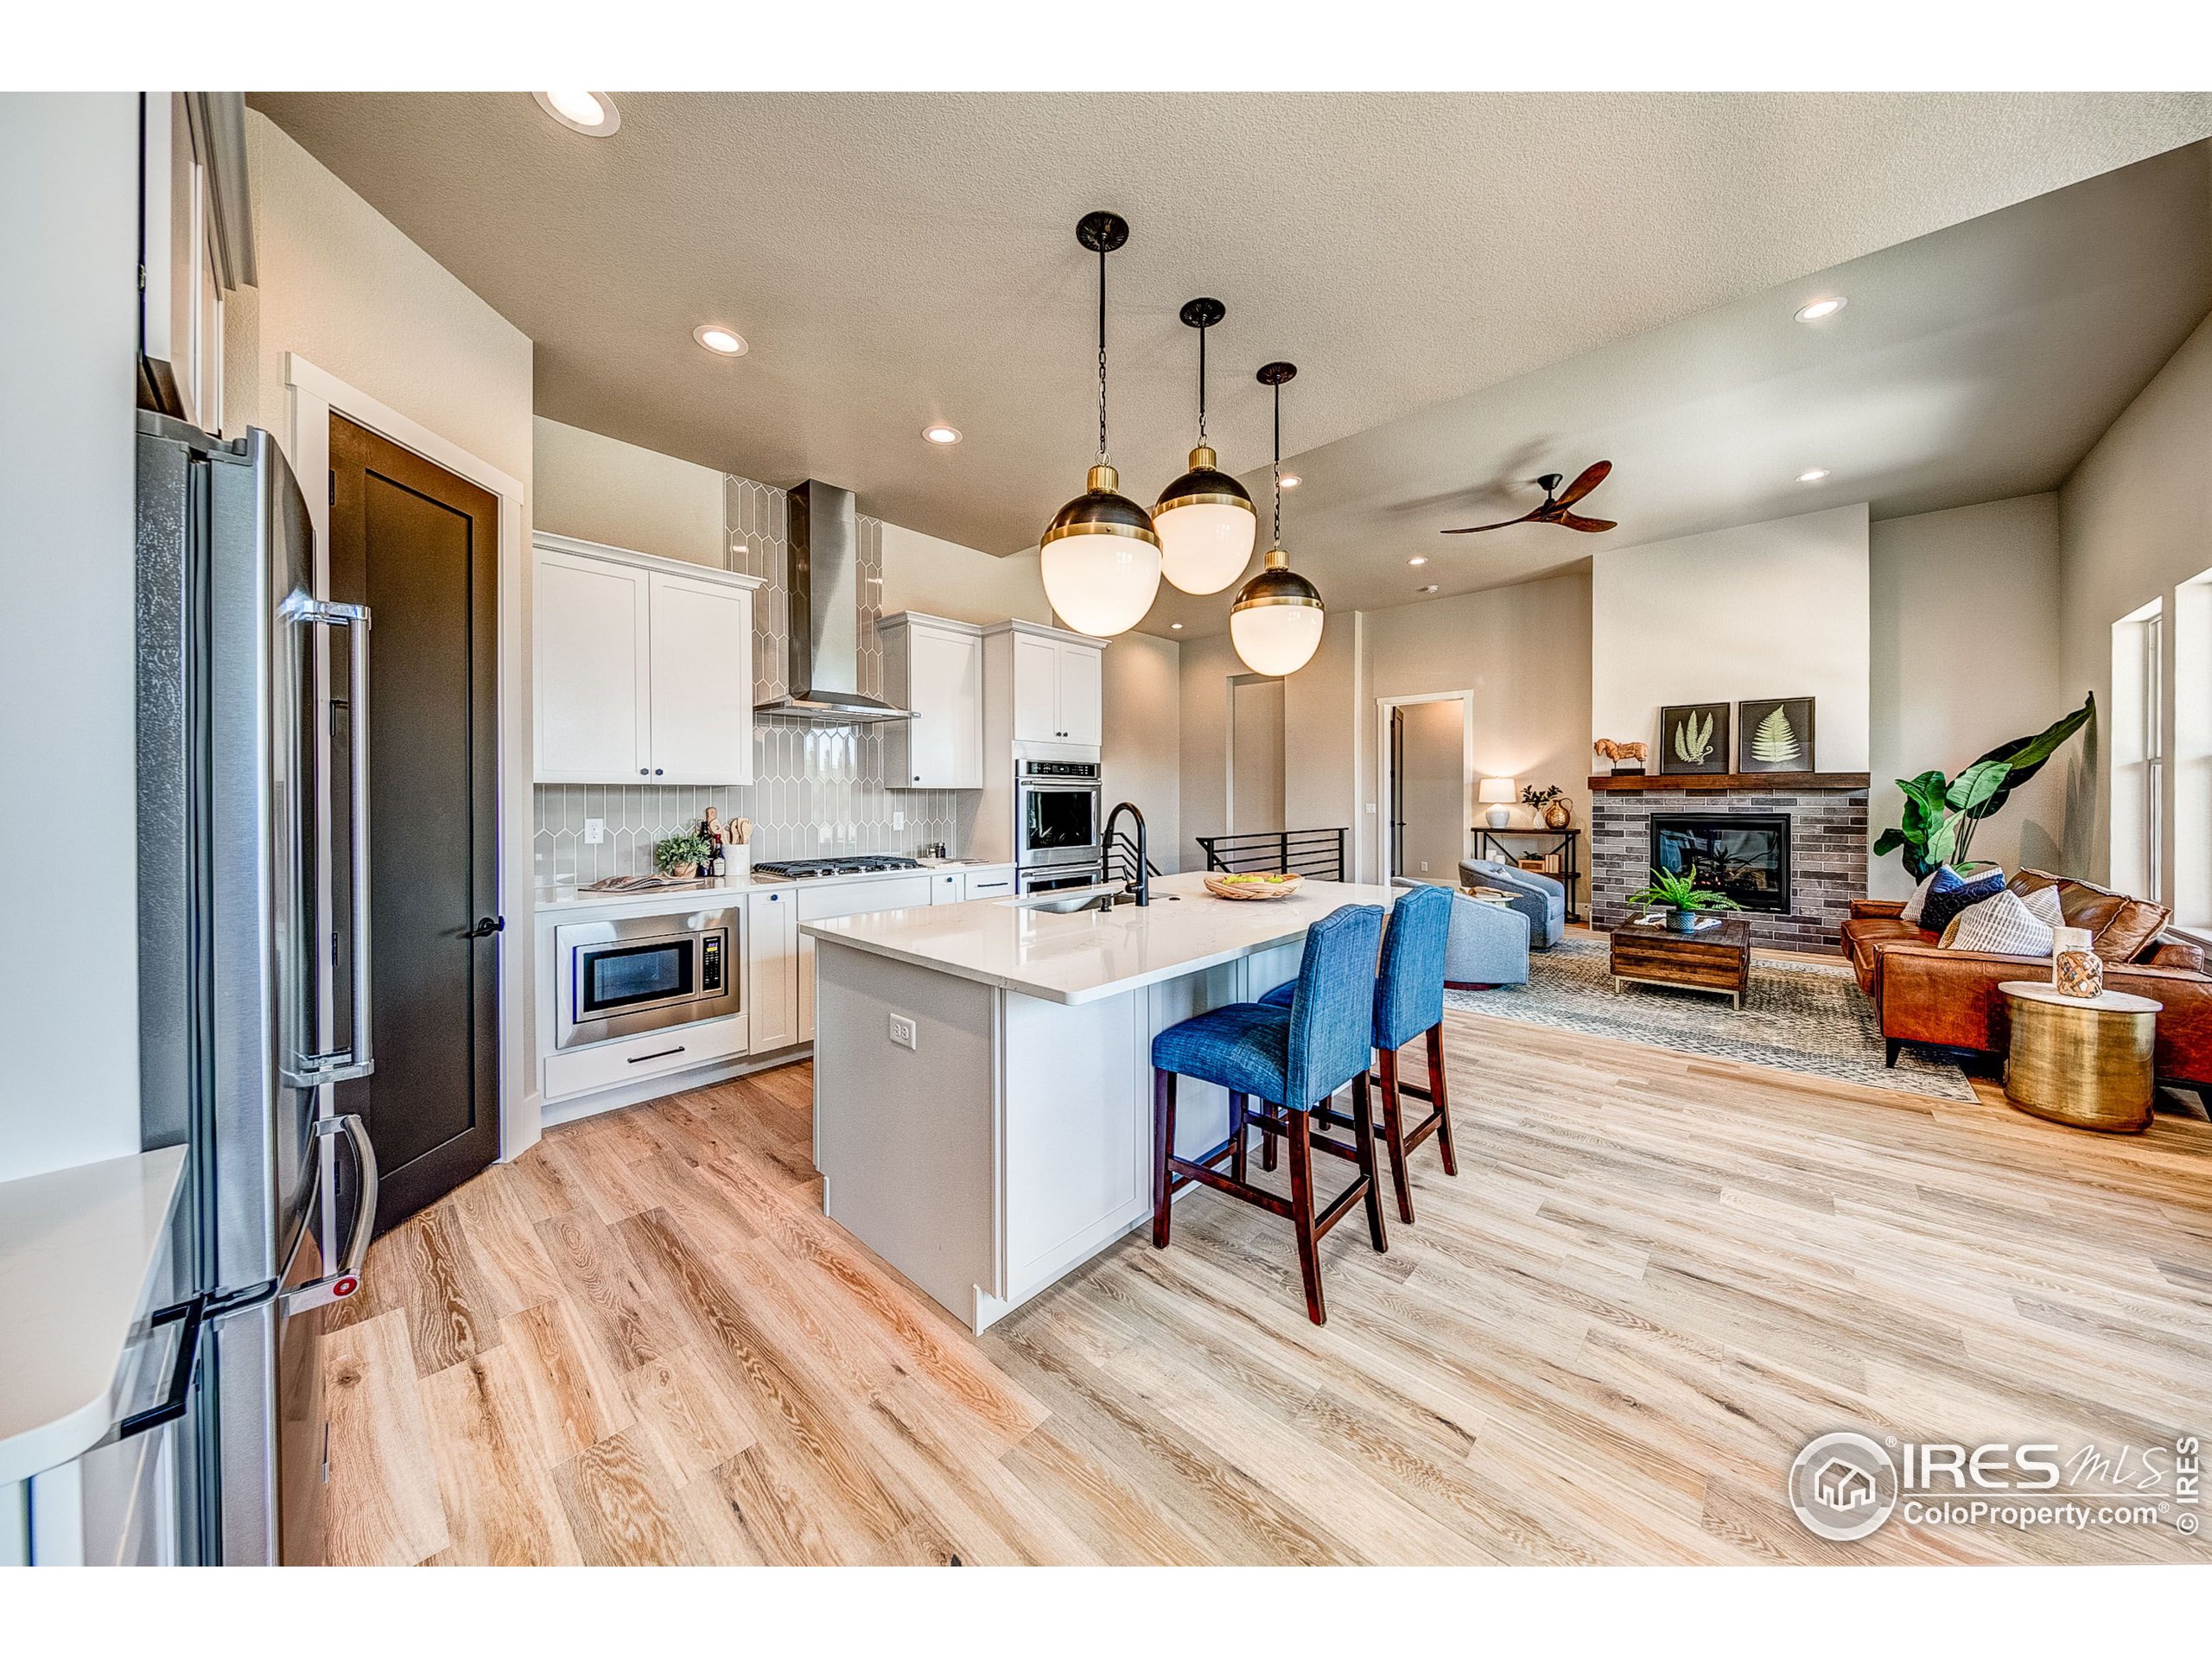 a open kitchen view with stainless steel appliances granite countertop a refrigerator a stove a sink dishwasher and a dining table with wooden floor